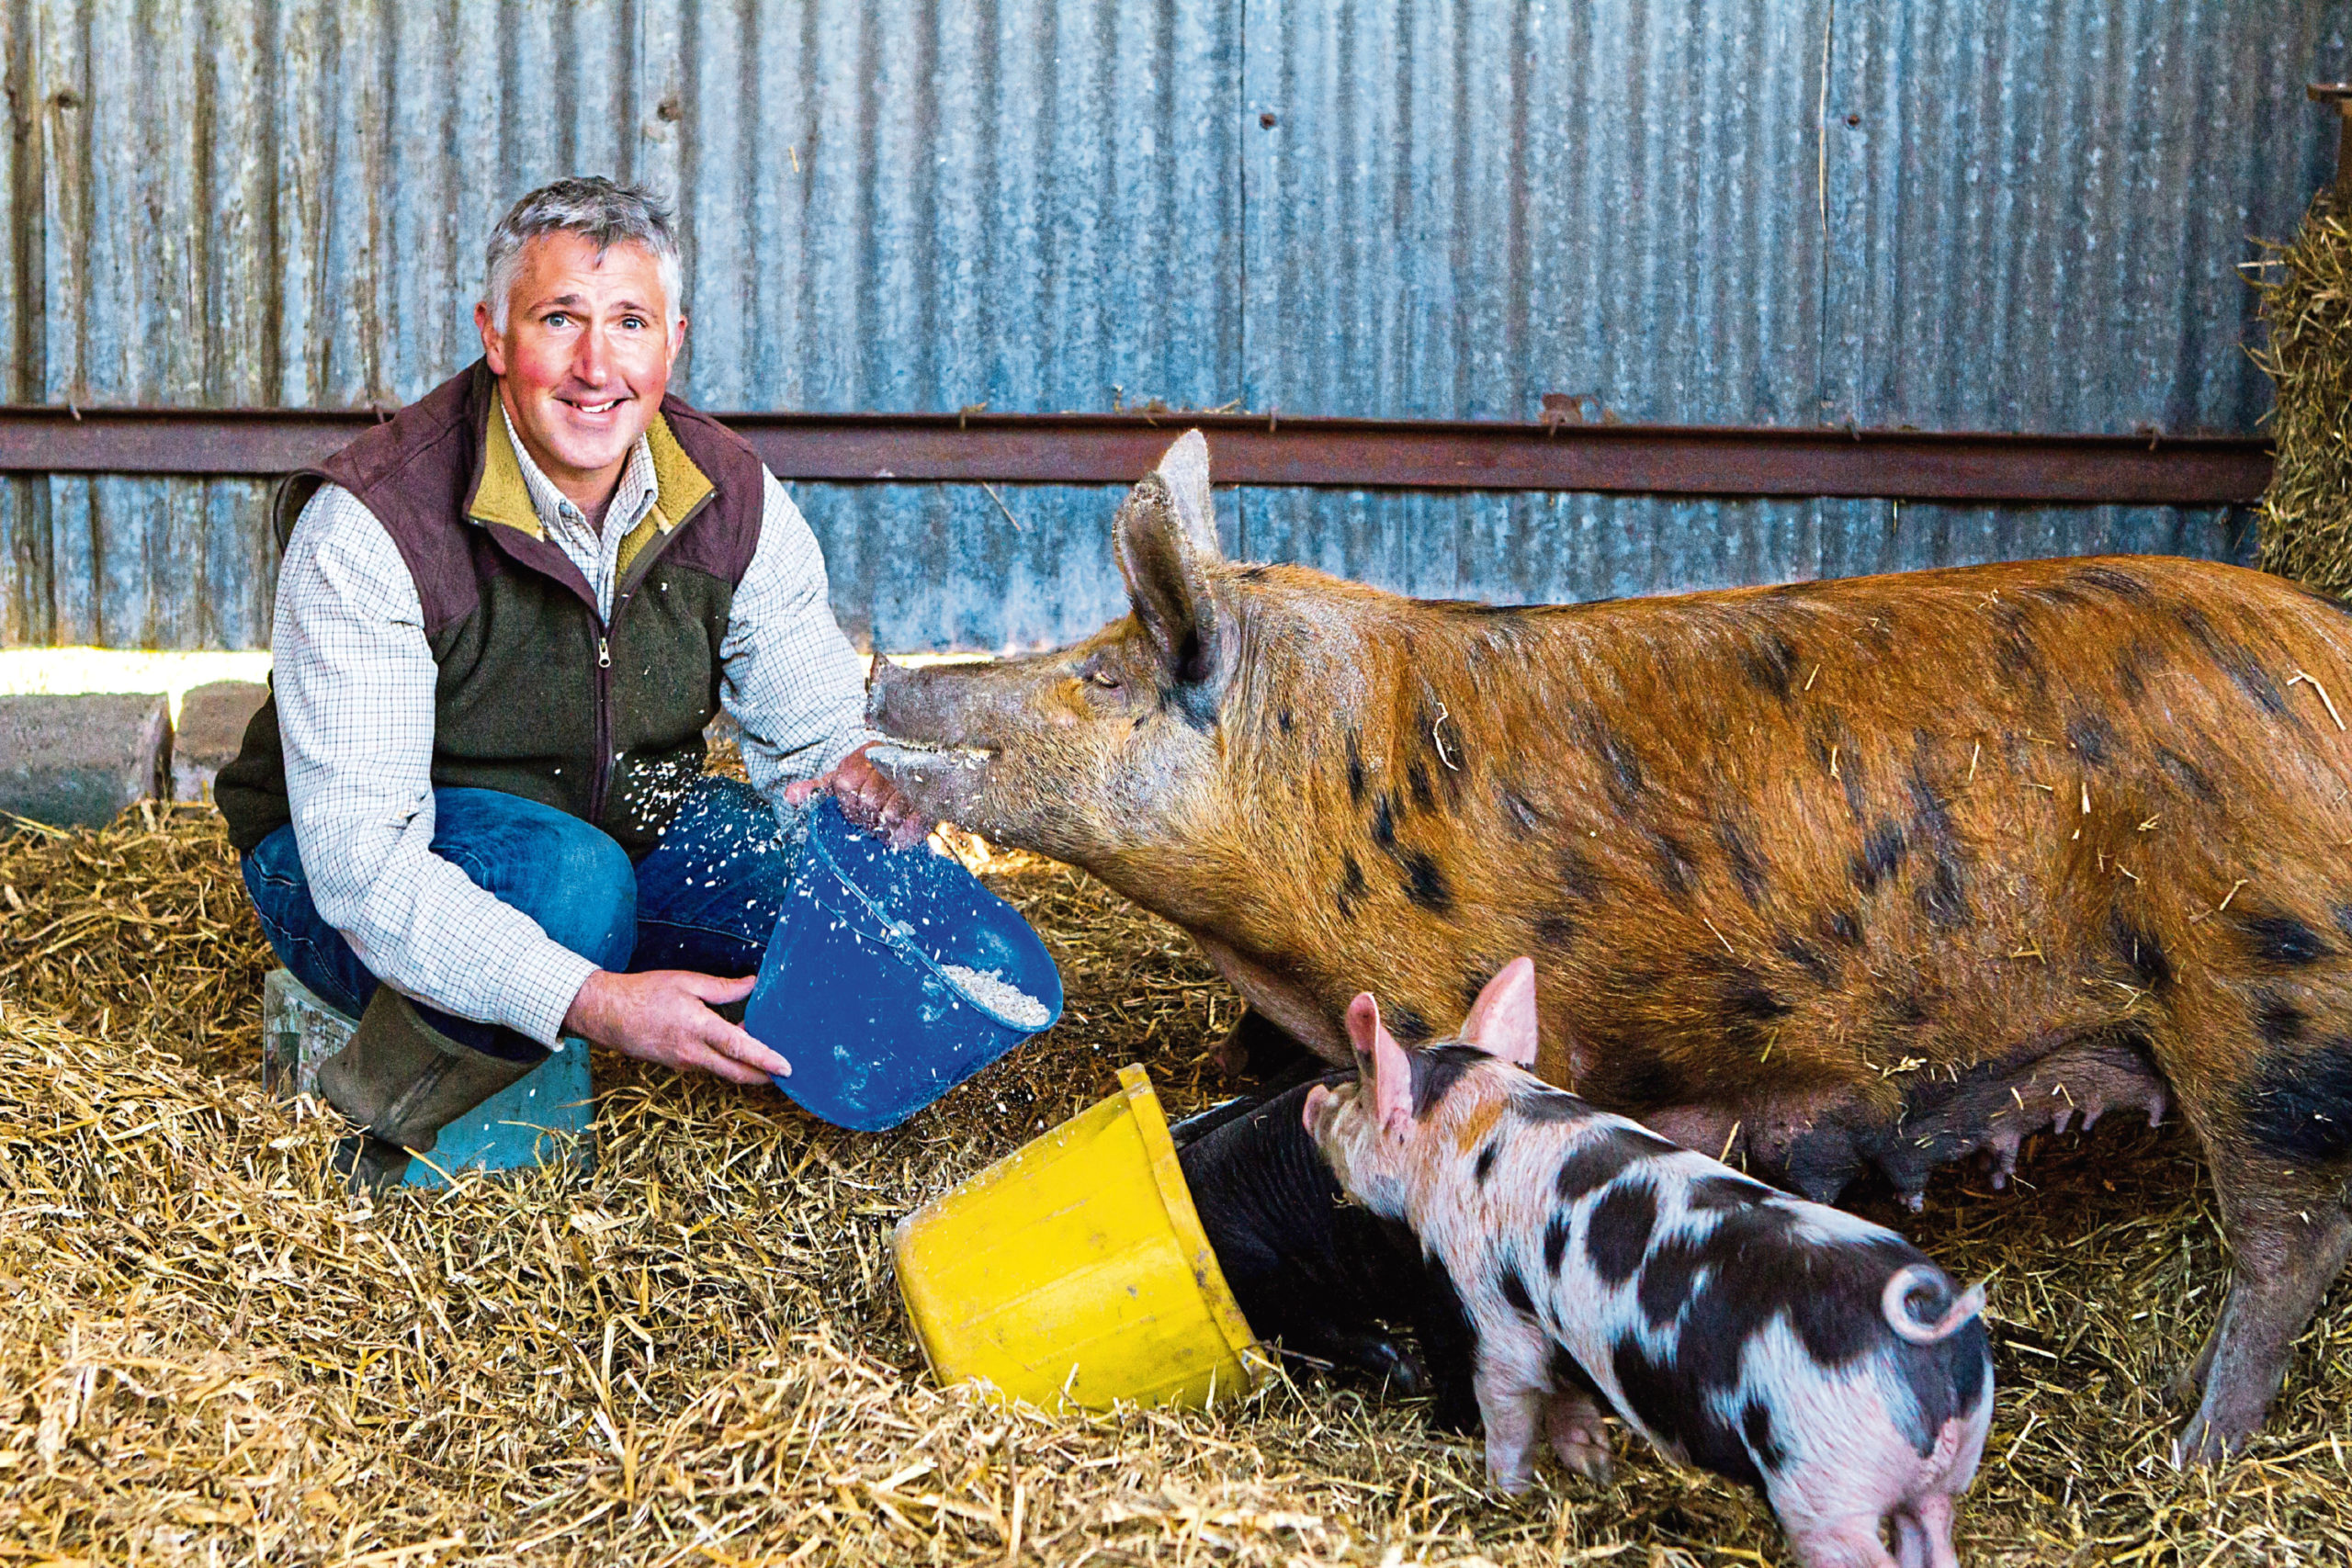 Steve MacDougall, Courier, Newmiln Farm, Tibbermore, by Perth. Farming Feature on Hugh Grierson, an organic farmer. Pictured, Hugh Grierson feeding a sow and piglets (pigs). HOLD FOR USE 27TH APRIL.